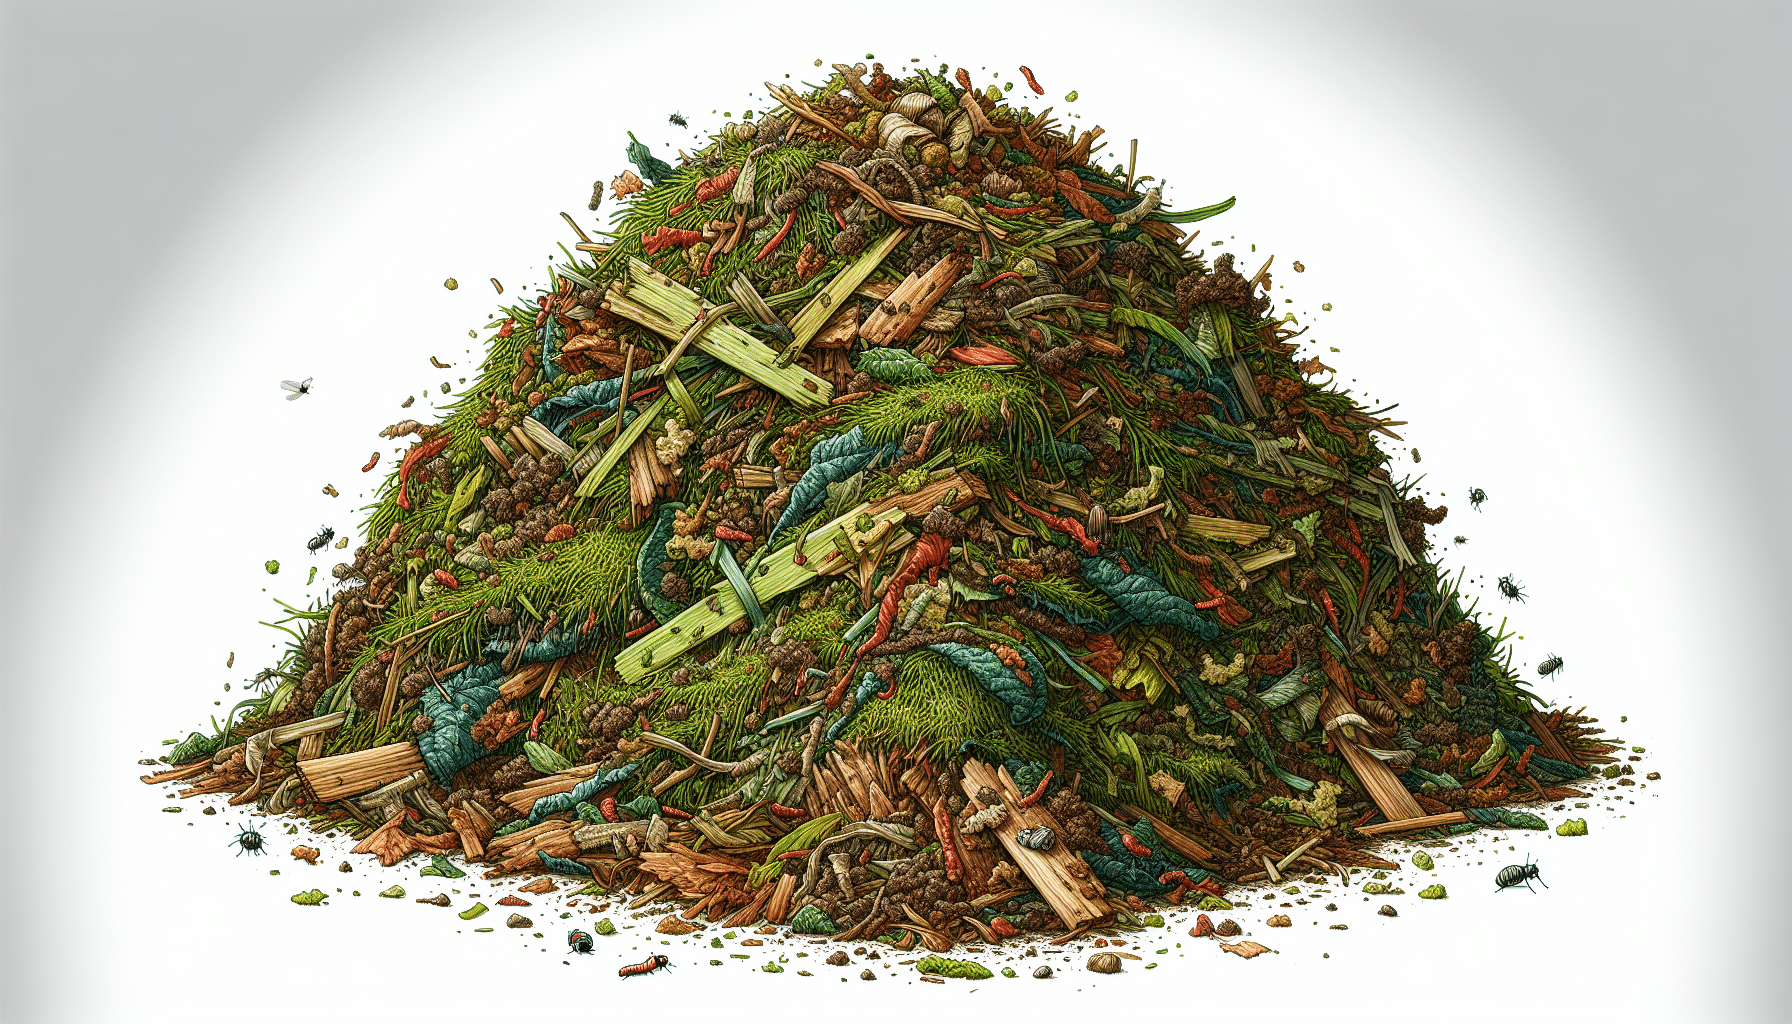 Mulch pile with various organic materials